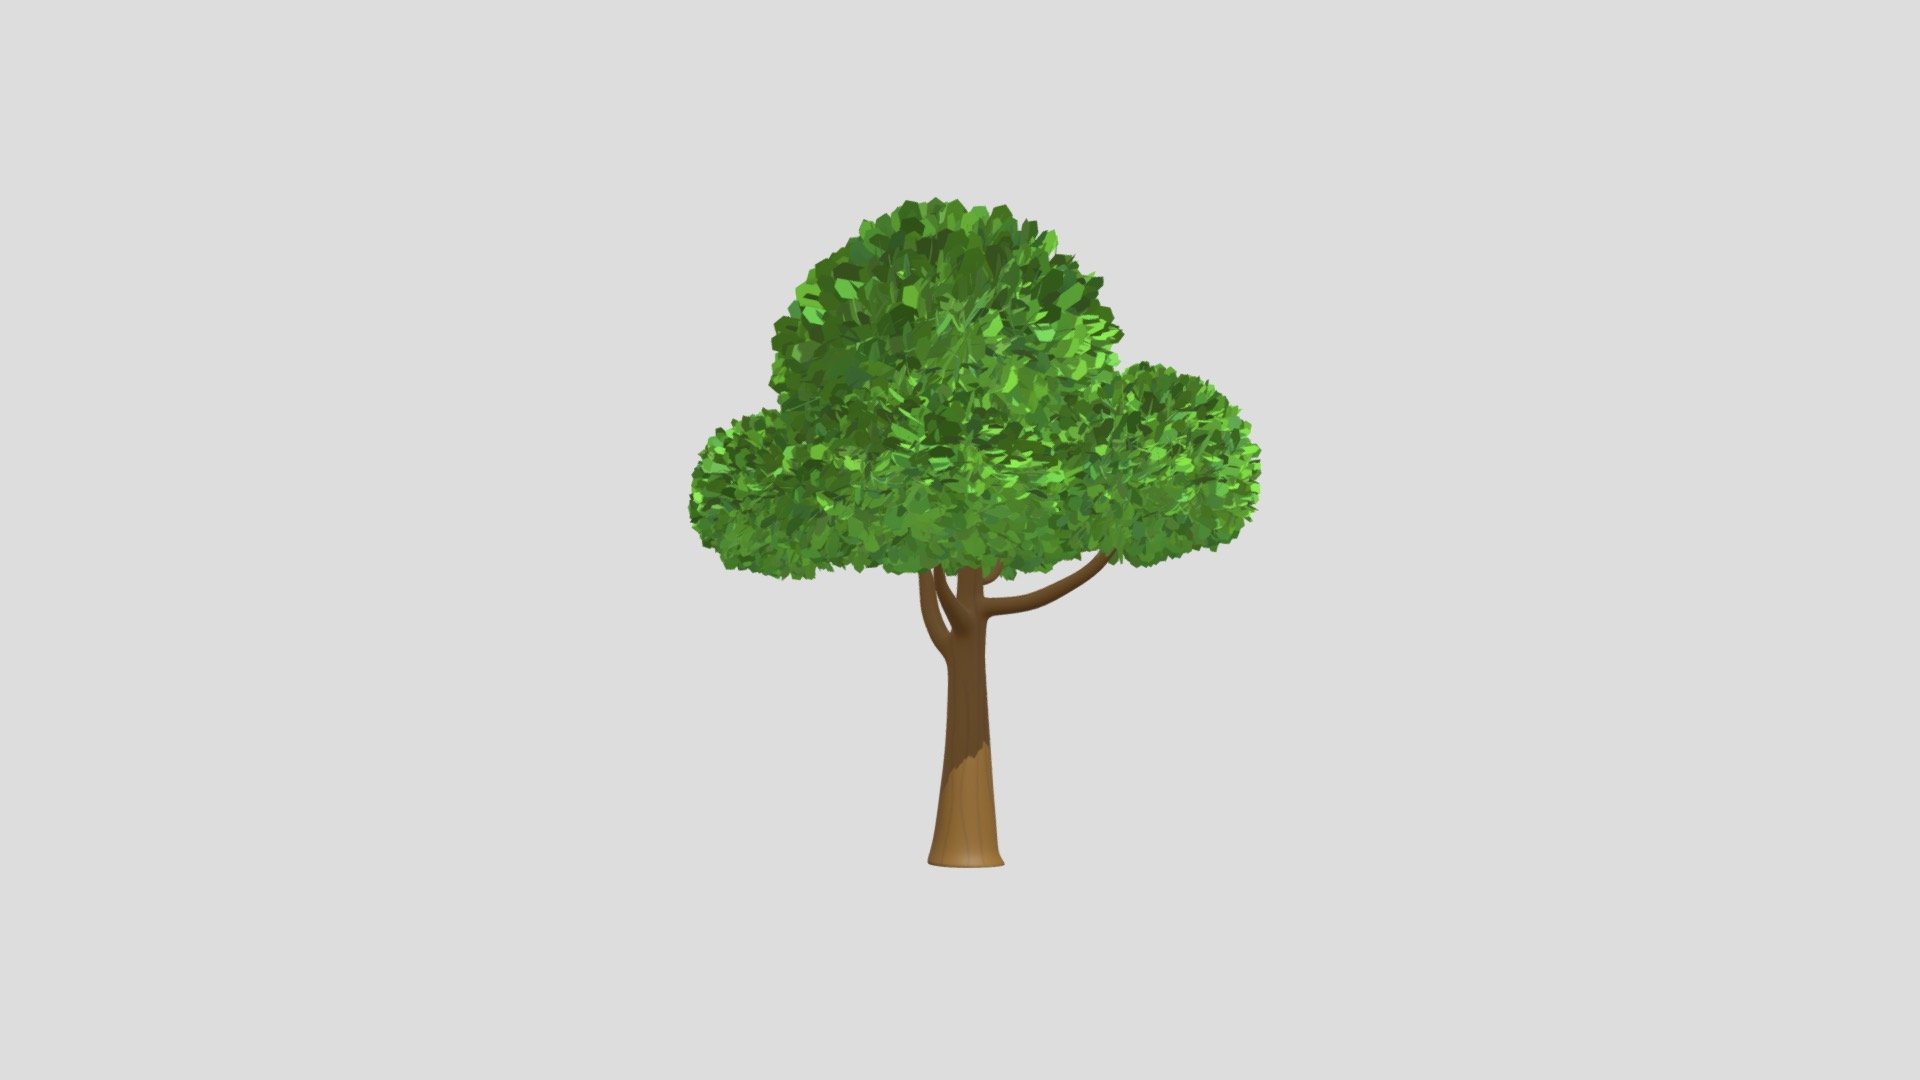 Textures: 1024 x 1024, Colors on texture: brown, green colors.

Materials: 2 - Leaves, trunk.

Smooth and flat shaded.

Non-Mirrored.

Subdivision Level: 0

Origin located on bottom-center.

Polygons: 68288

Vertices: 94215

Formats: Fbx, Obj, Stl, Dae.

I hope you enjoy the model! - Toon Tree - Buy Royalty Free 3D model by Ed+ (@EDplus) 3d model